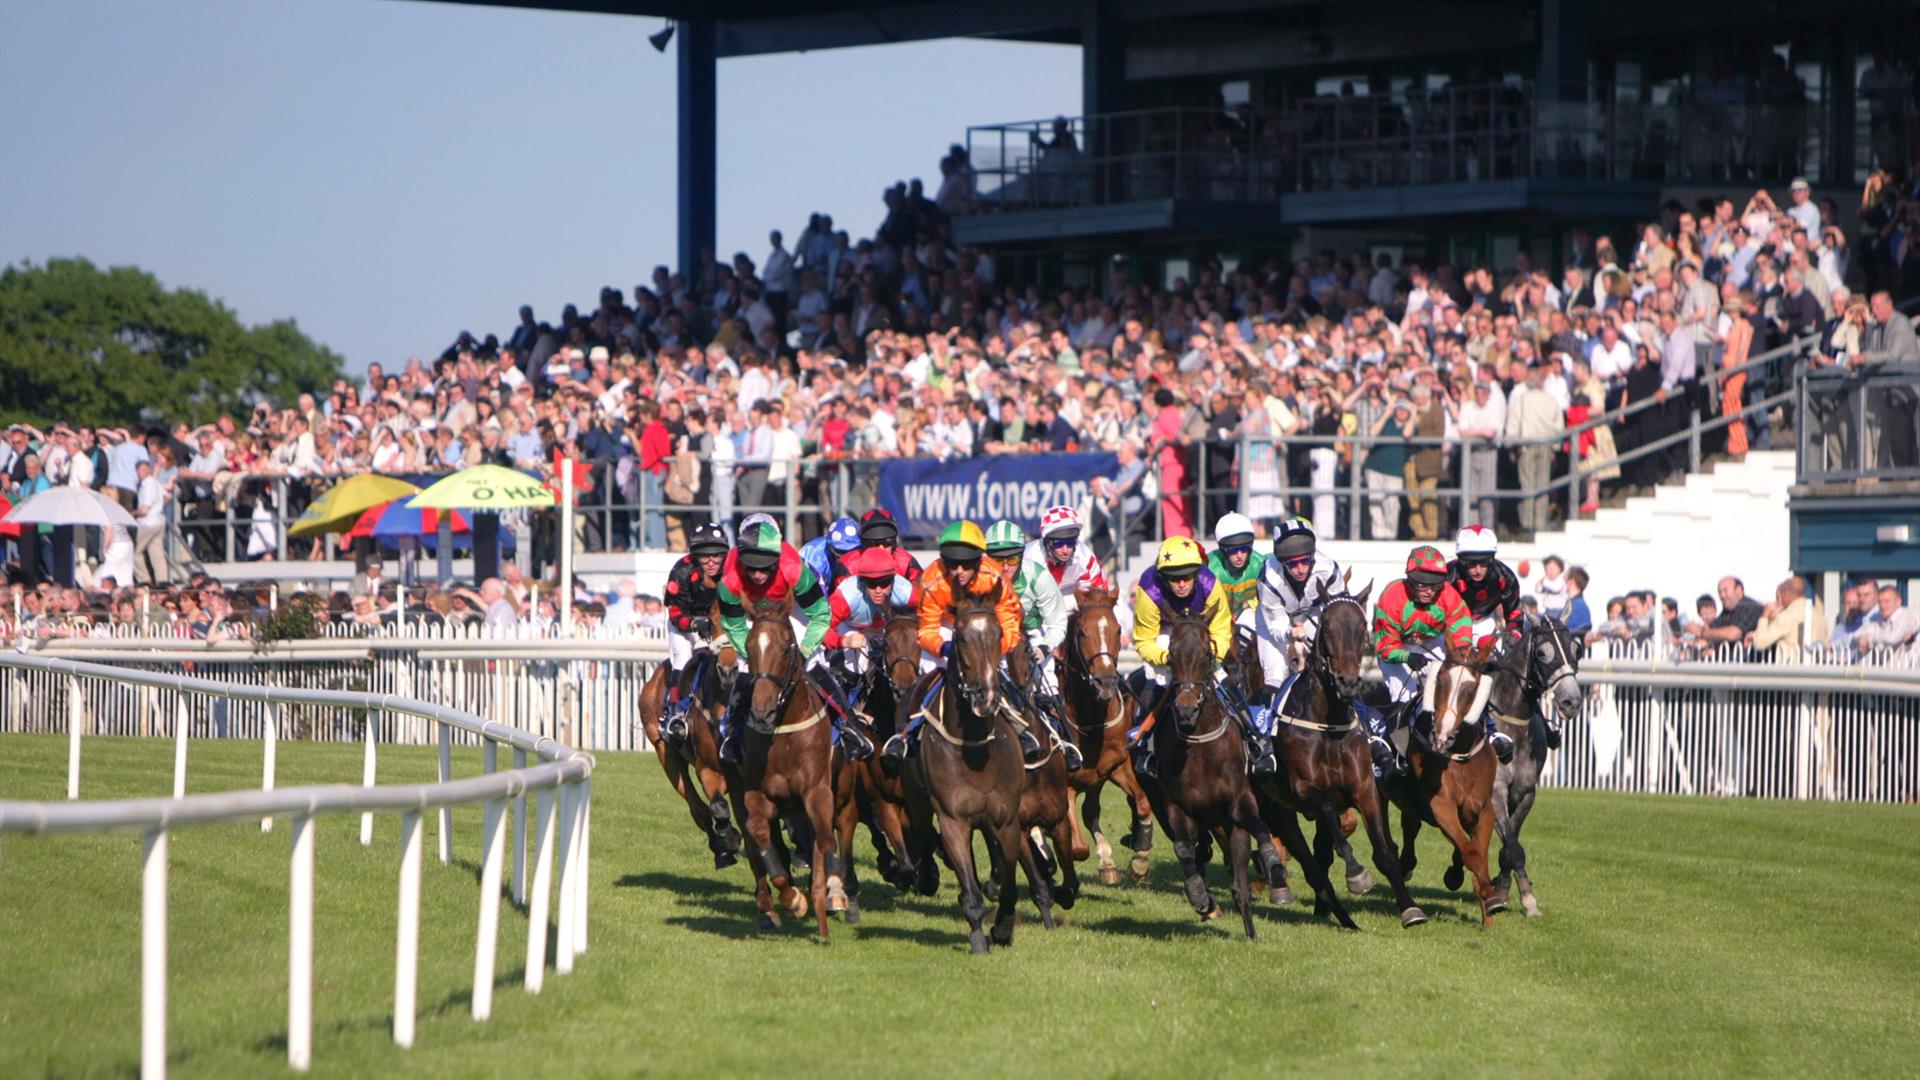 Horse racing at the Down Royal Racecourse with horses running along the track with spectators in background